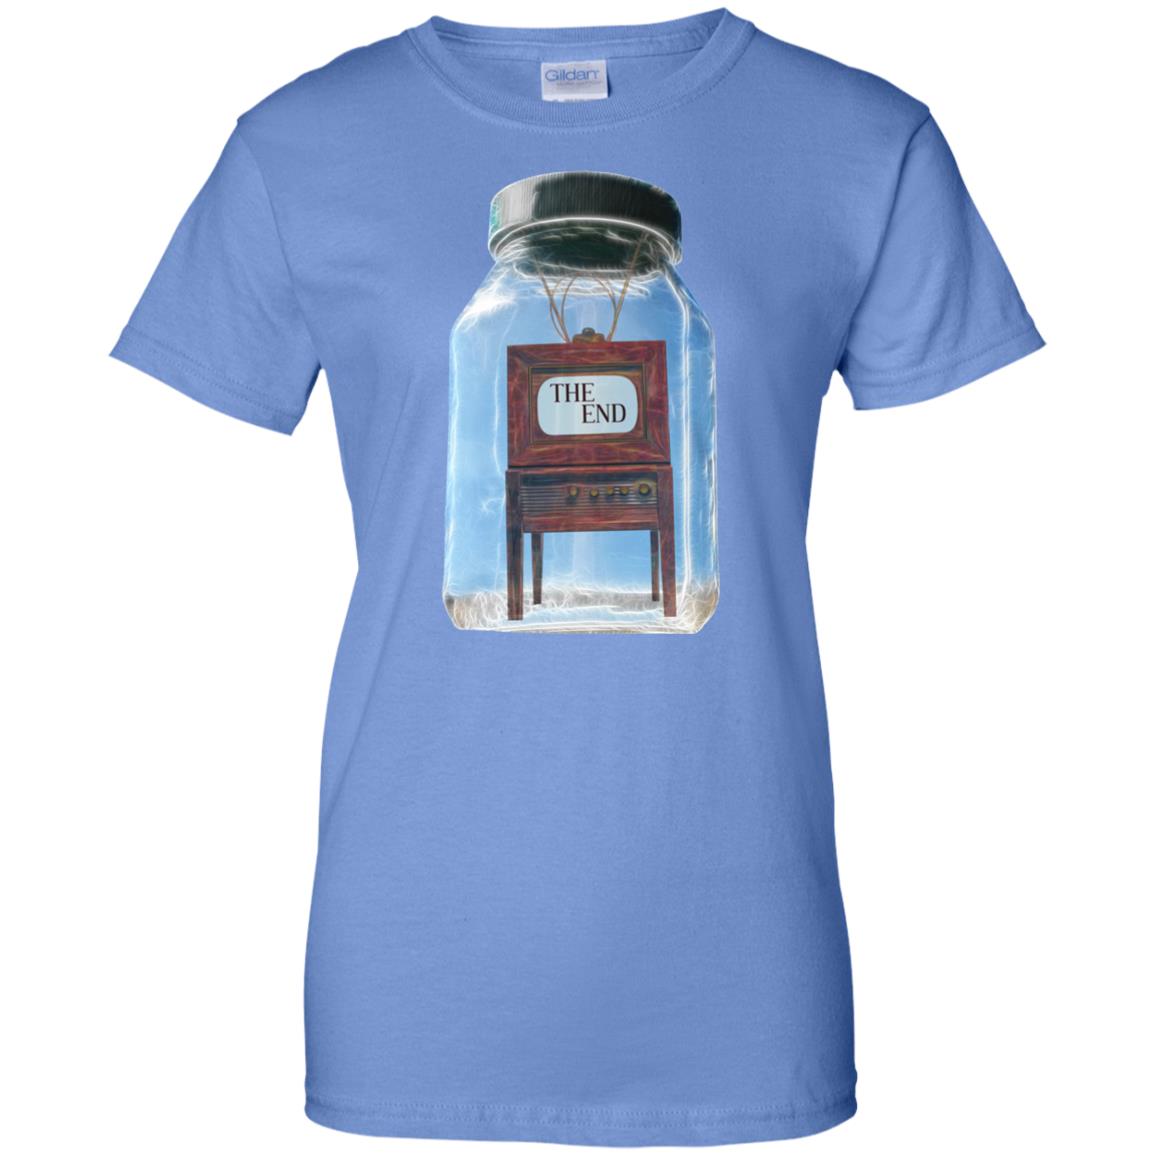 THE END - Women's Relaxed Fit T-Shirt